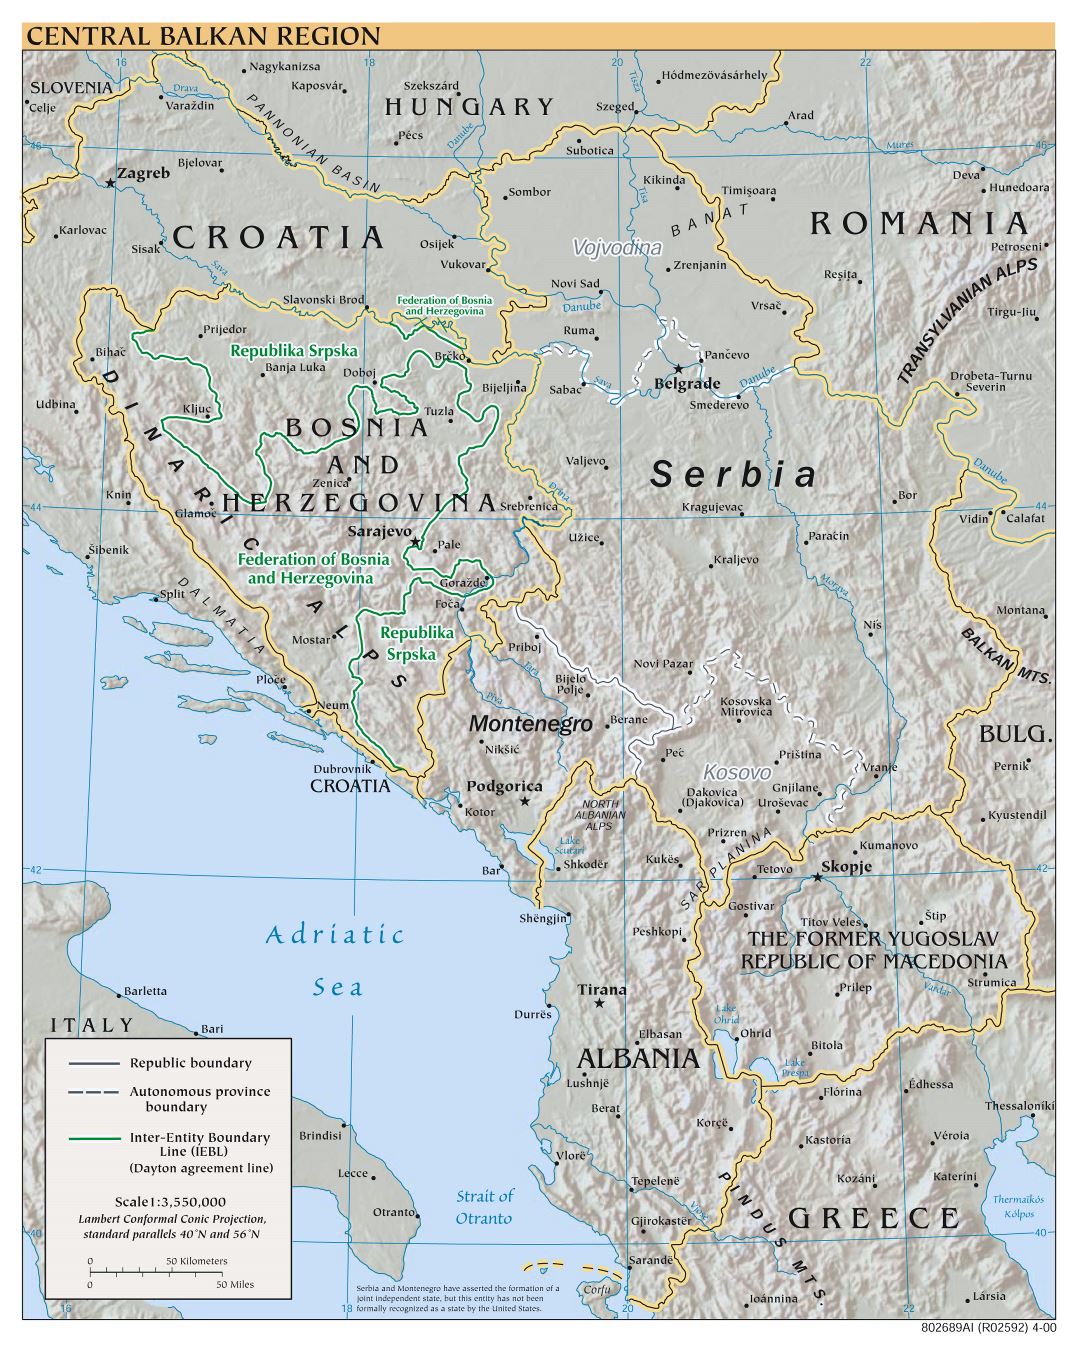 Large scale political map of Central Balkan Region with relief and major cities - 2000